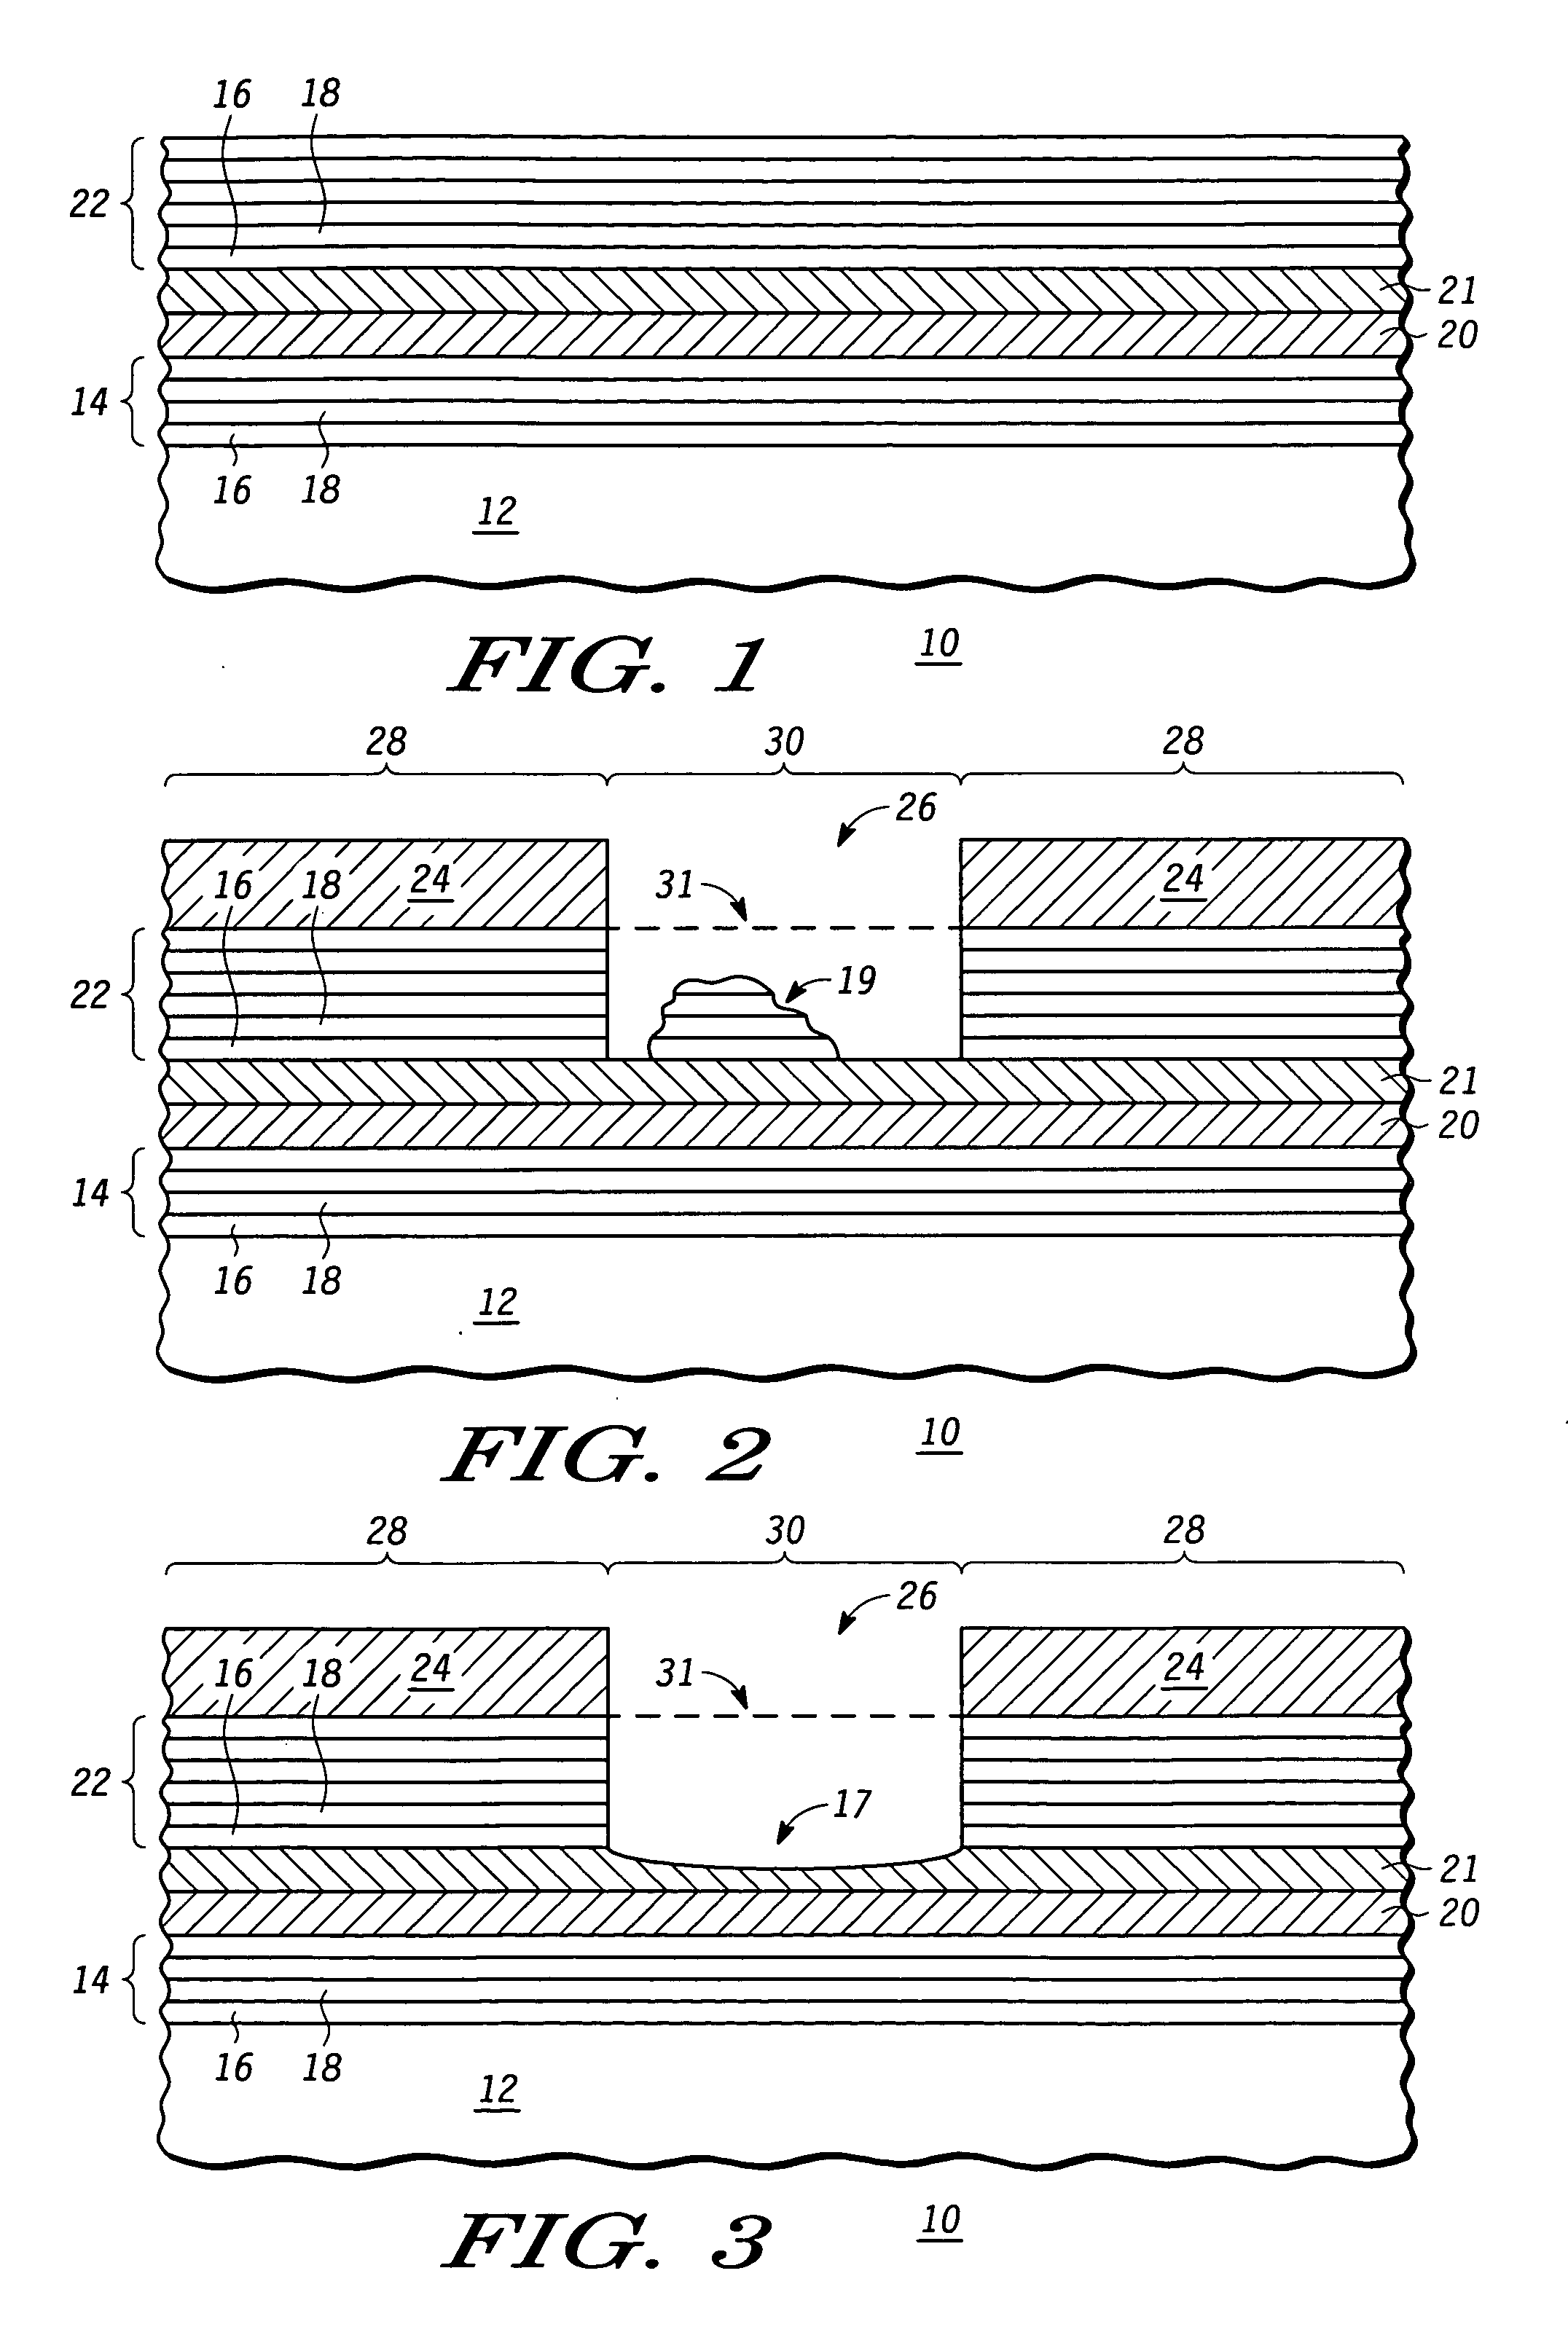 Reflective mask useful for transferring a pattern using extreme ultra violet (EUV) radiation and method of making the same